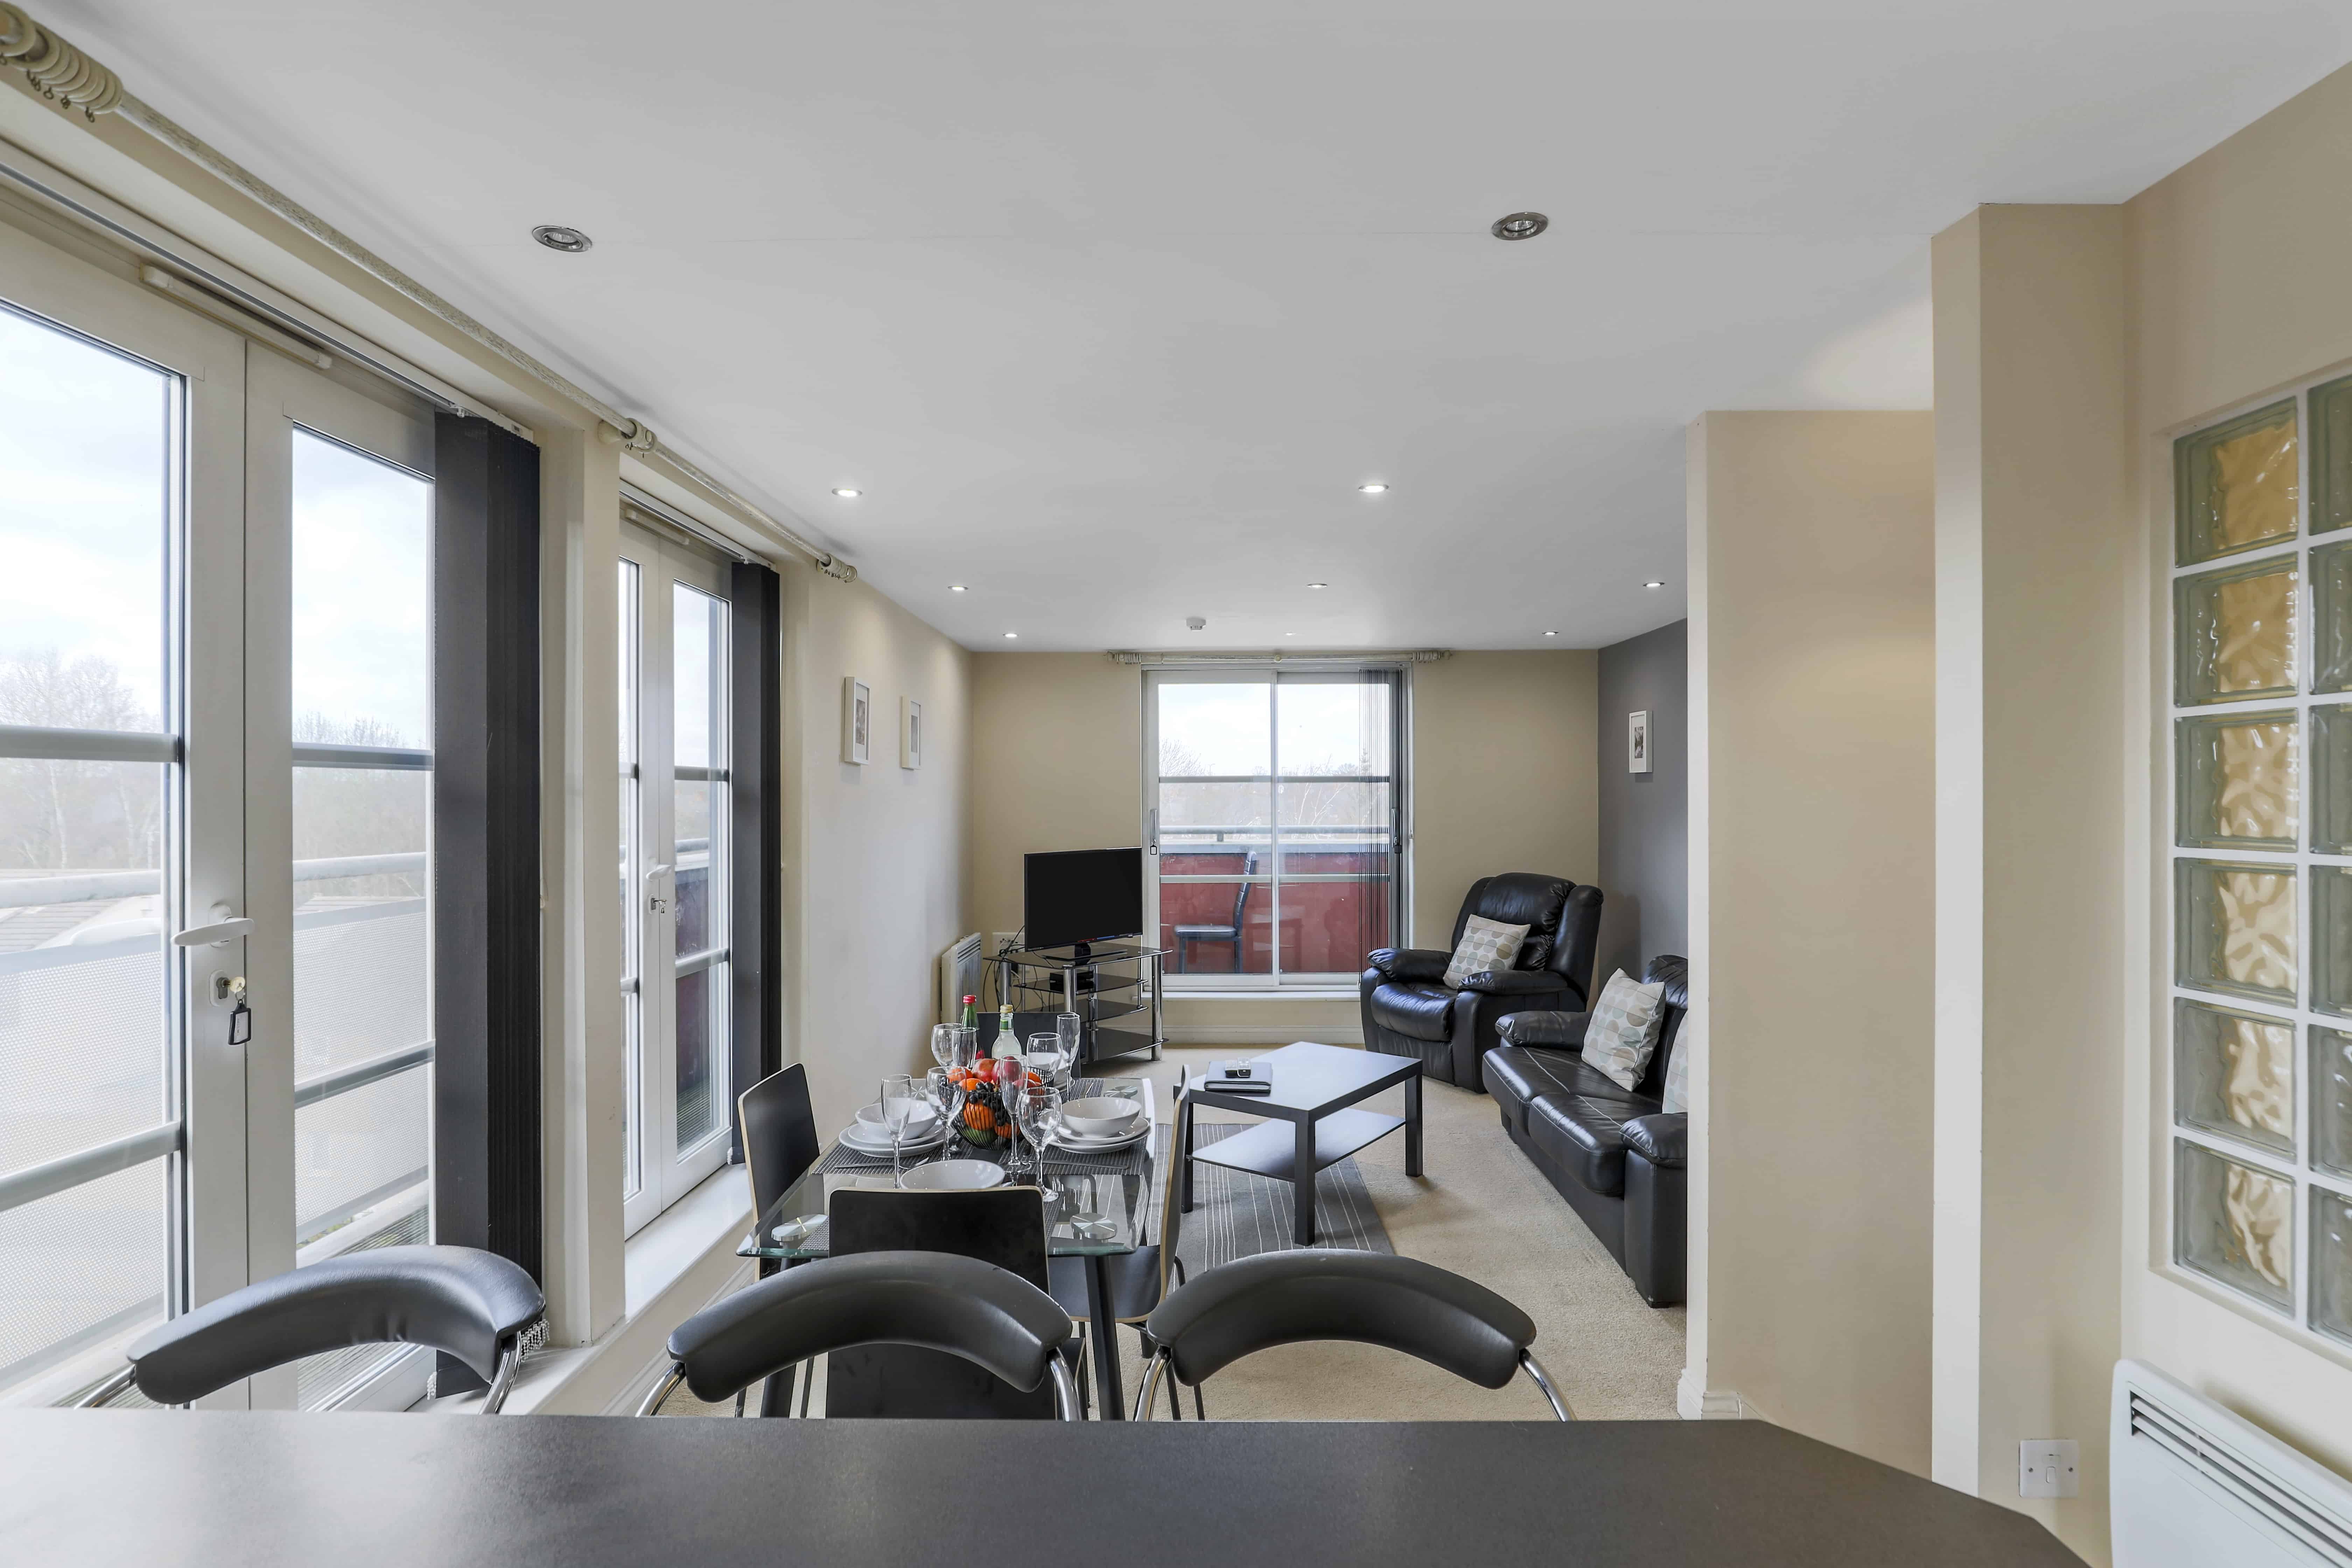 Freemen's Meadow Serviced Apartments Leicester